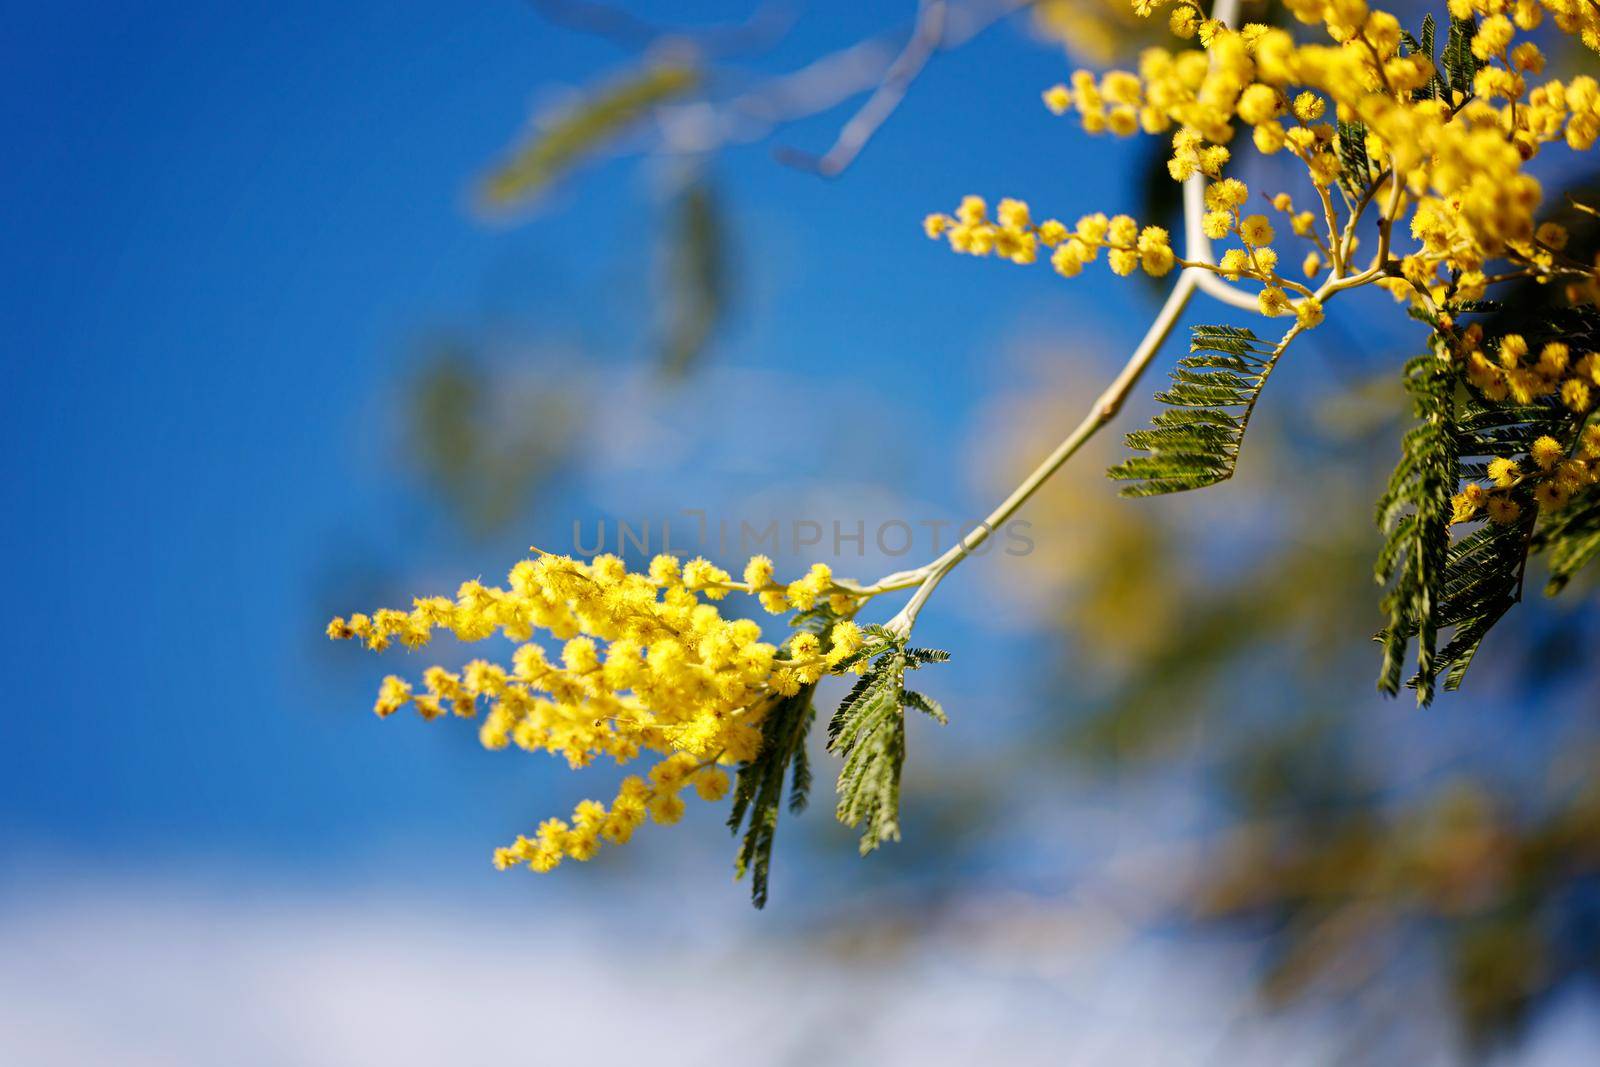 Yellow flowers of a mimosa tree on a background of blue sky.